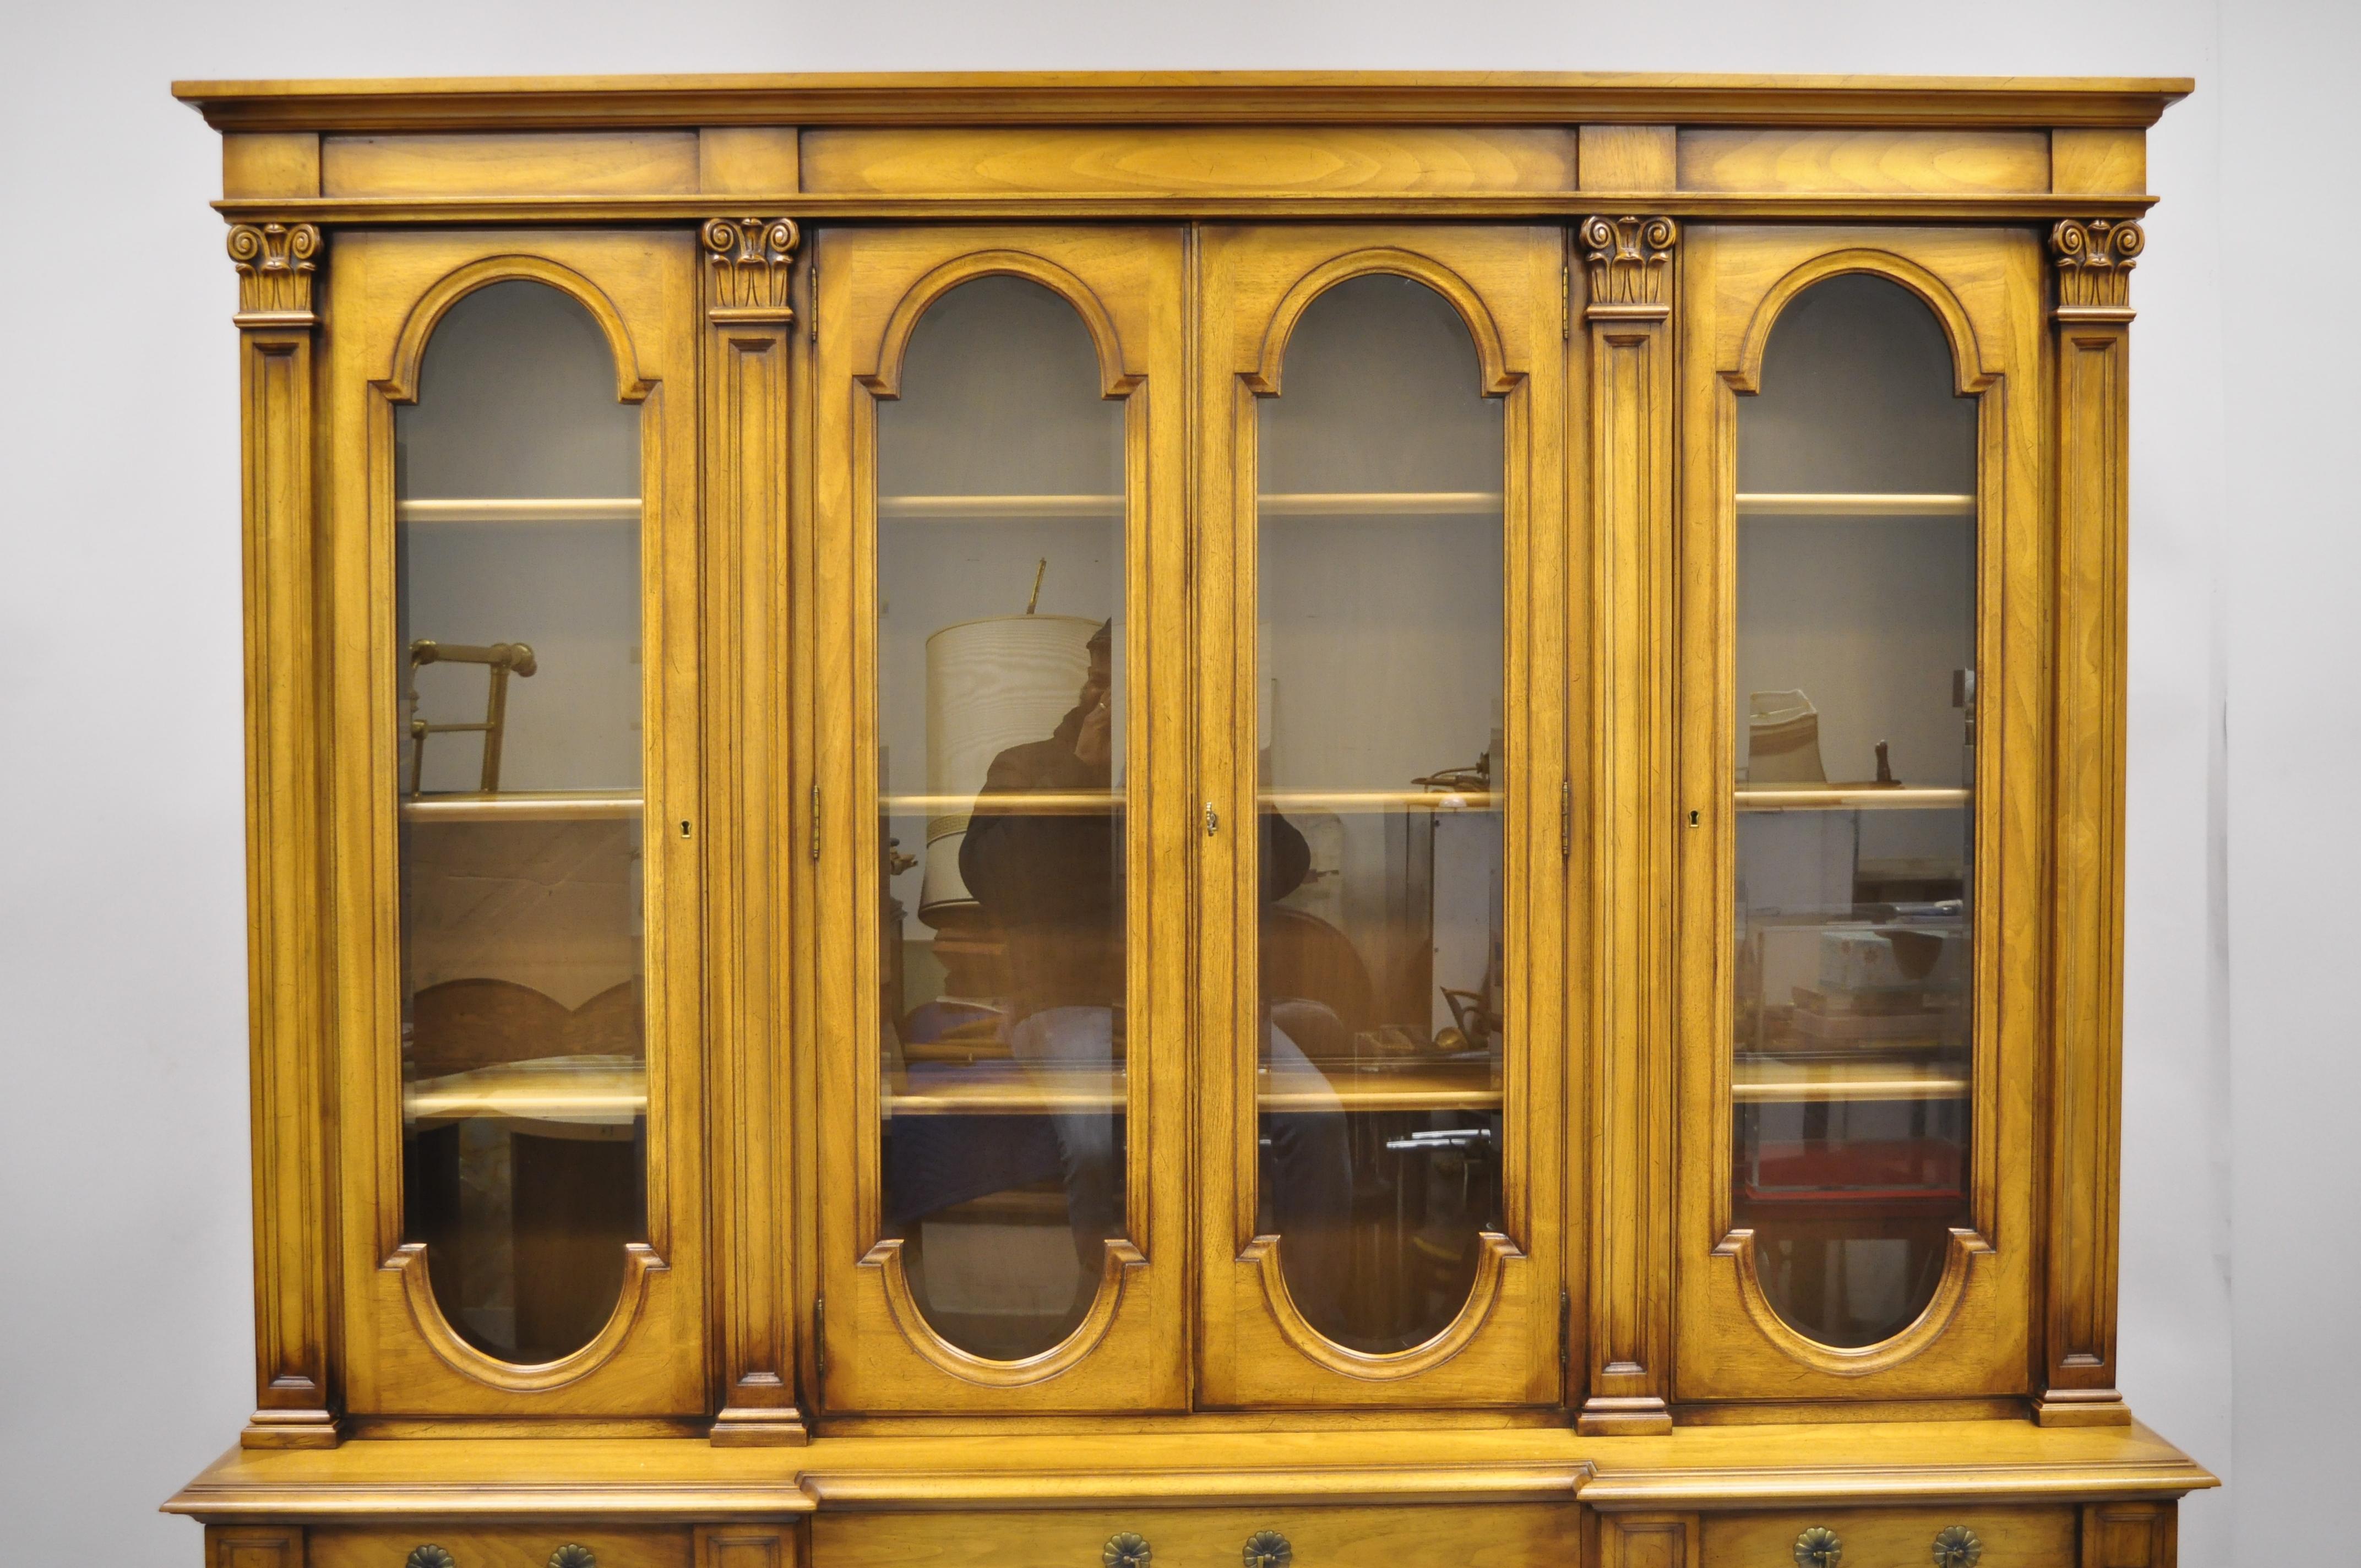 Karges Italian Provincial large fruitwood burl wood breakfront China cabinet. Listing includes beveled glass panels, carved Corinthian columns, beautiful wood grain, 2 part construction, 8 swing doors, original label, working lock and key, 3